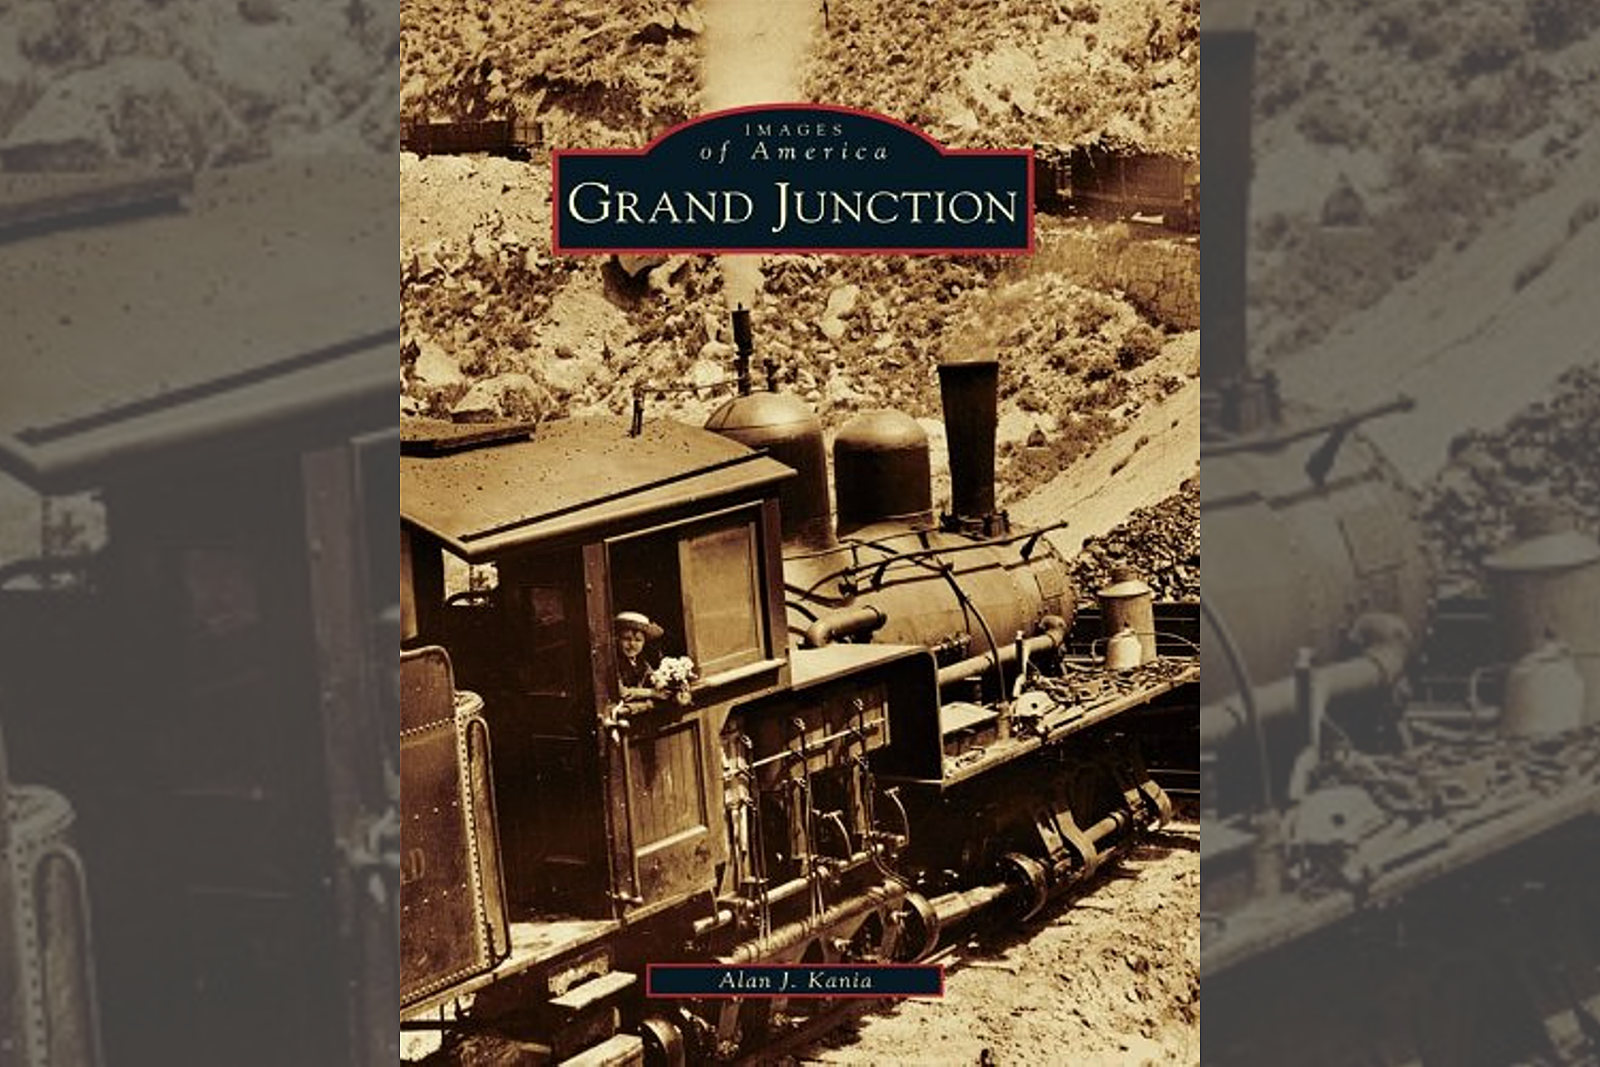 9 Must-Have Books Every Grand Junction Home Needs